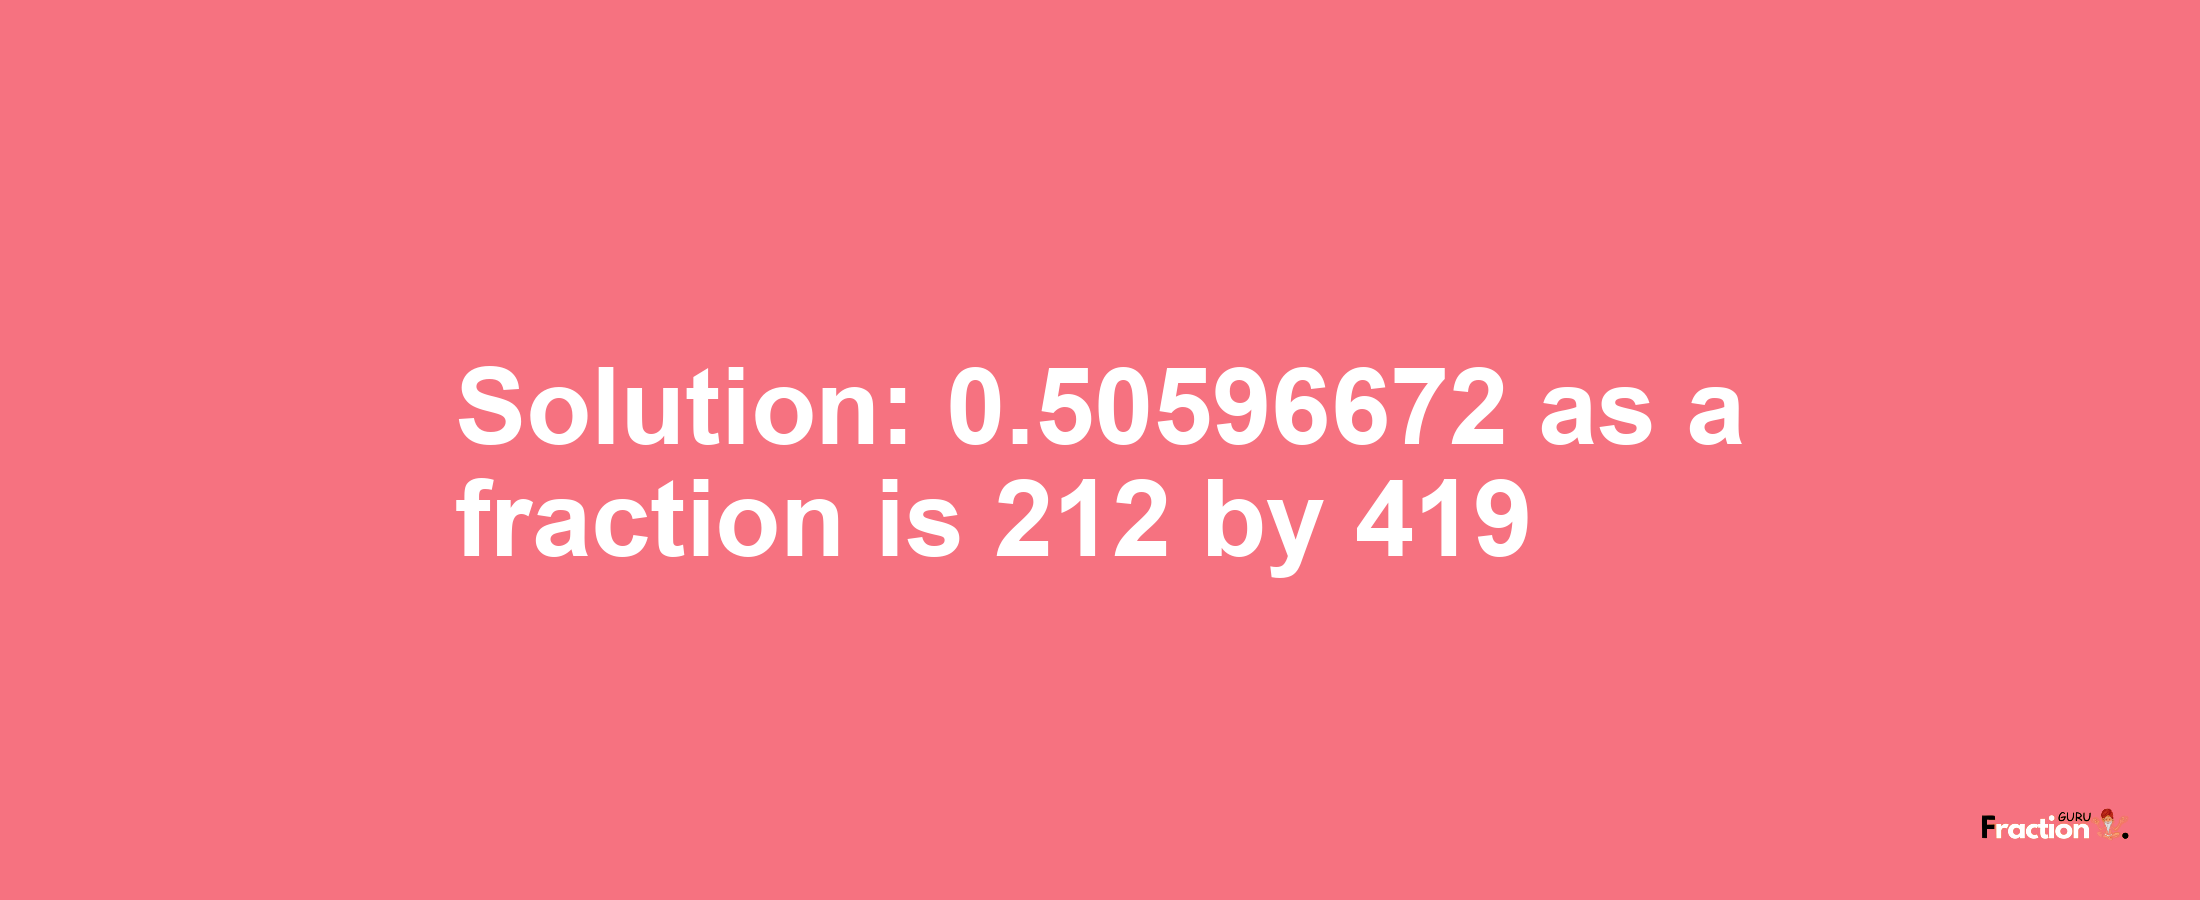 Solution:0.50596672 as a fraction is 212/419